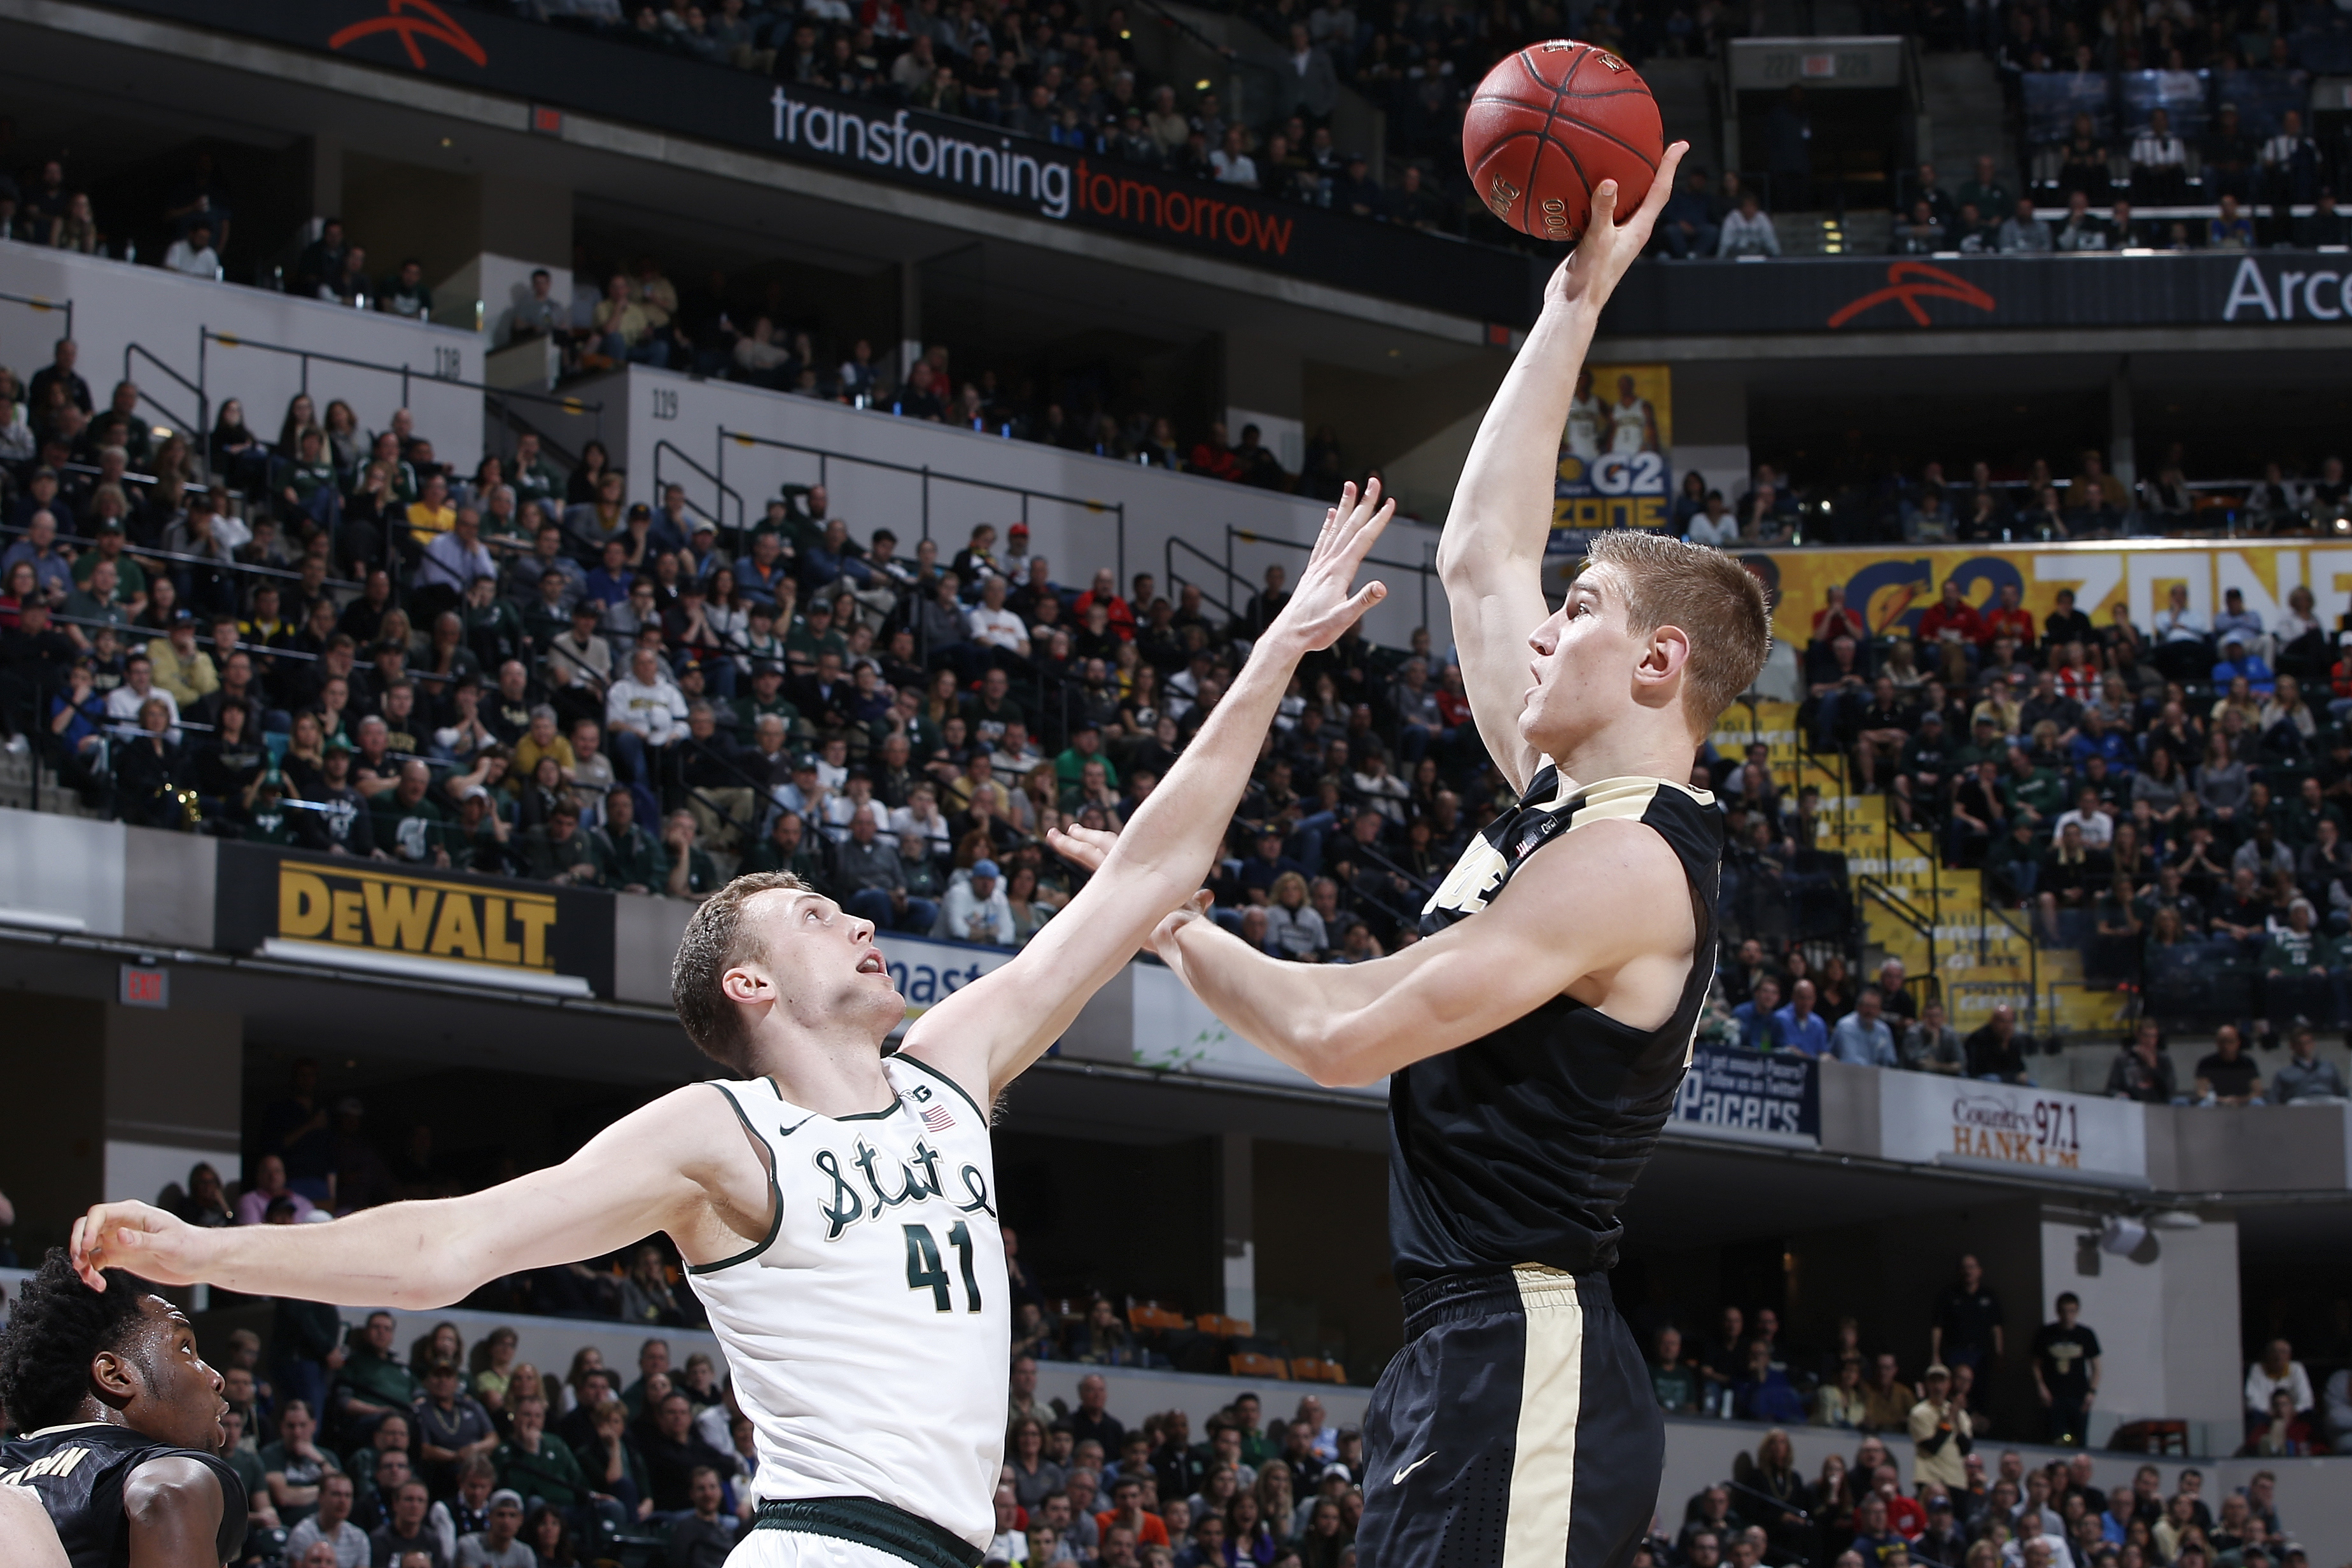 INDIANAPOLIS, IN - MARCH 13: Isaac Haas #44 of the Purdue Boilermakers shoots against Colby Wollenman #41 of the Michigan State Spartans in the championship game of the Big Ten Basketball Tournament at Bankers Life Fieldhouse on March 13, 2016 in Indianapolis, Indiana. (Photo by Joe Robbins/Getty Images)